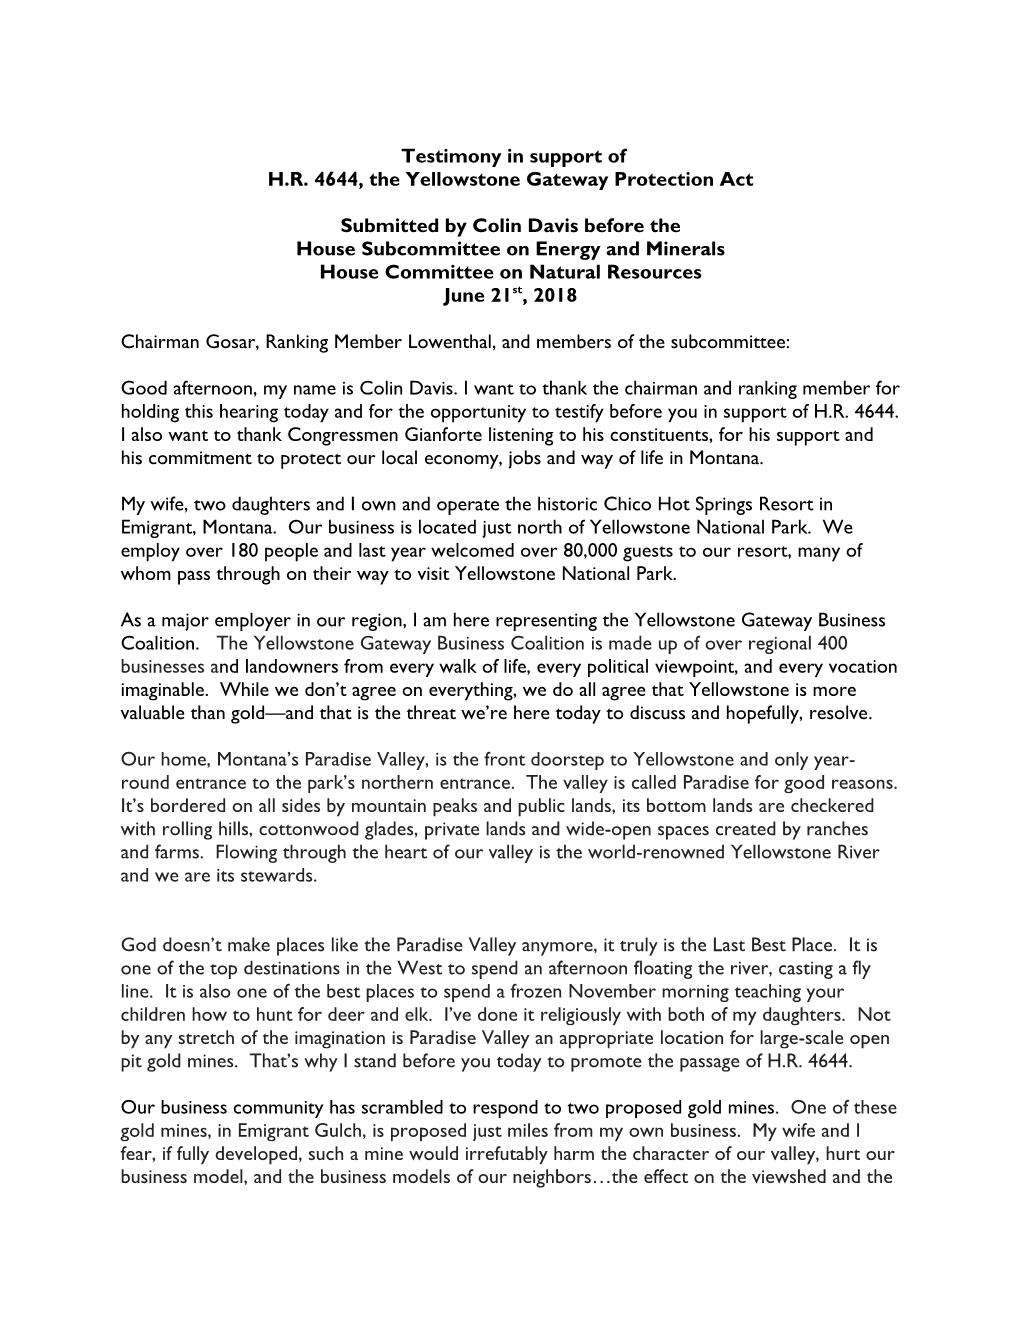 Testimony in Support of H.R. 4644, the Yellowstone Gateway Protection Act